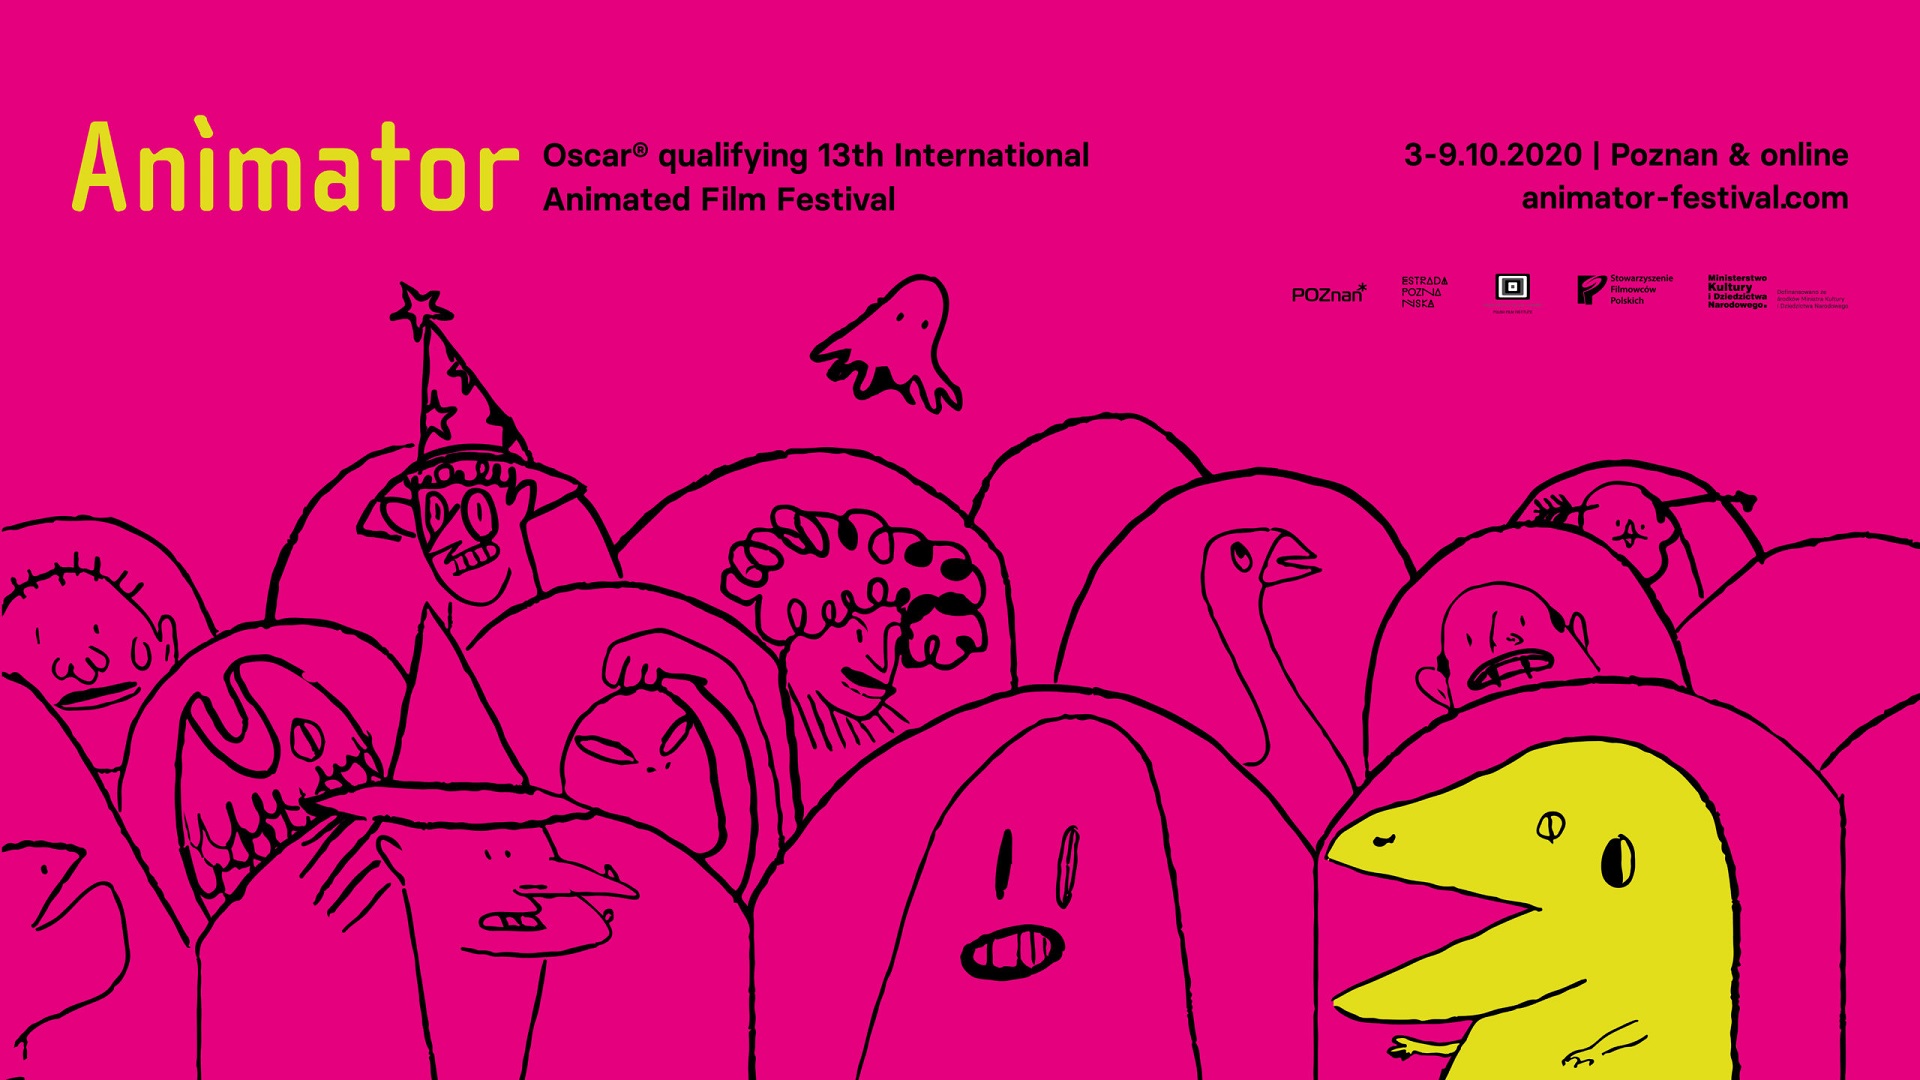 PSNC provides technical support for the ANIMATOR 2020 festival